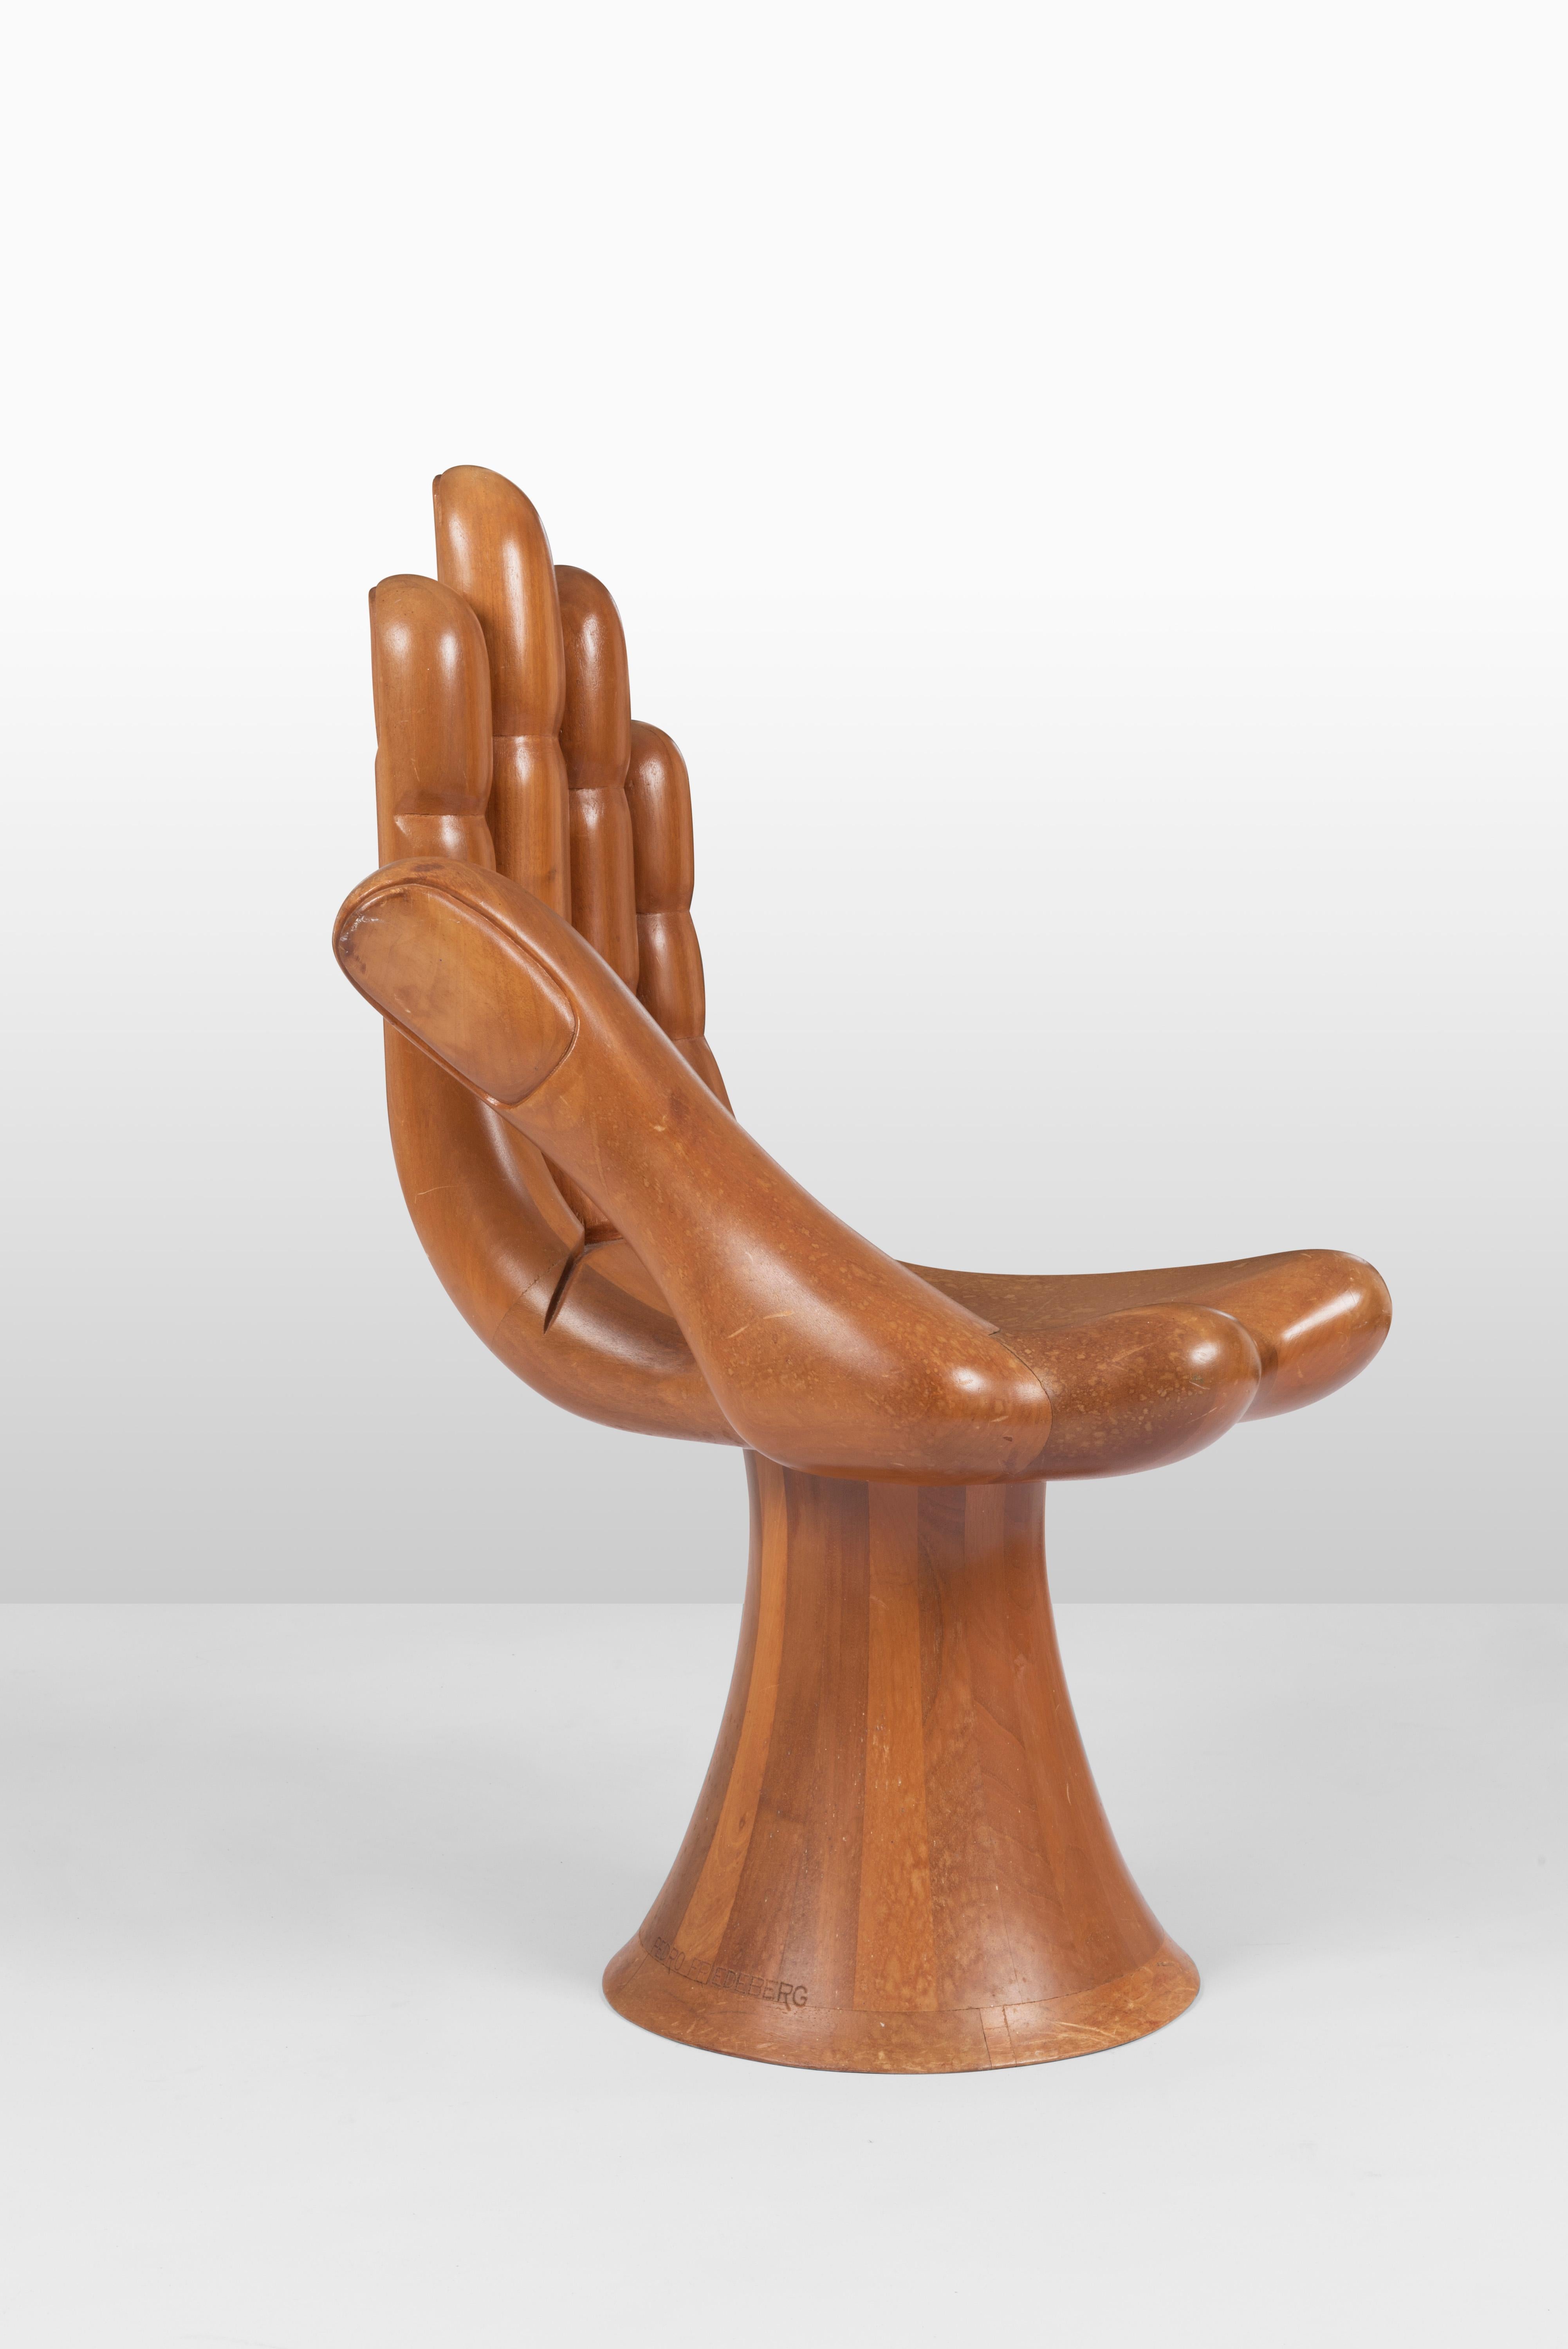 This beautiful golden brown Pedro Friedeberg hand chair was commissioned in the 1960s and is crafted of solid Honduran Mahogany. In 1961 when Pedro was working with artist Mathias Goeritz, Mathias was collaborating with a highly-skilled, master